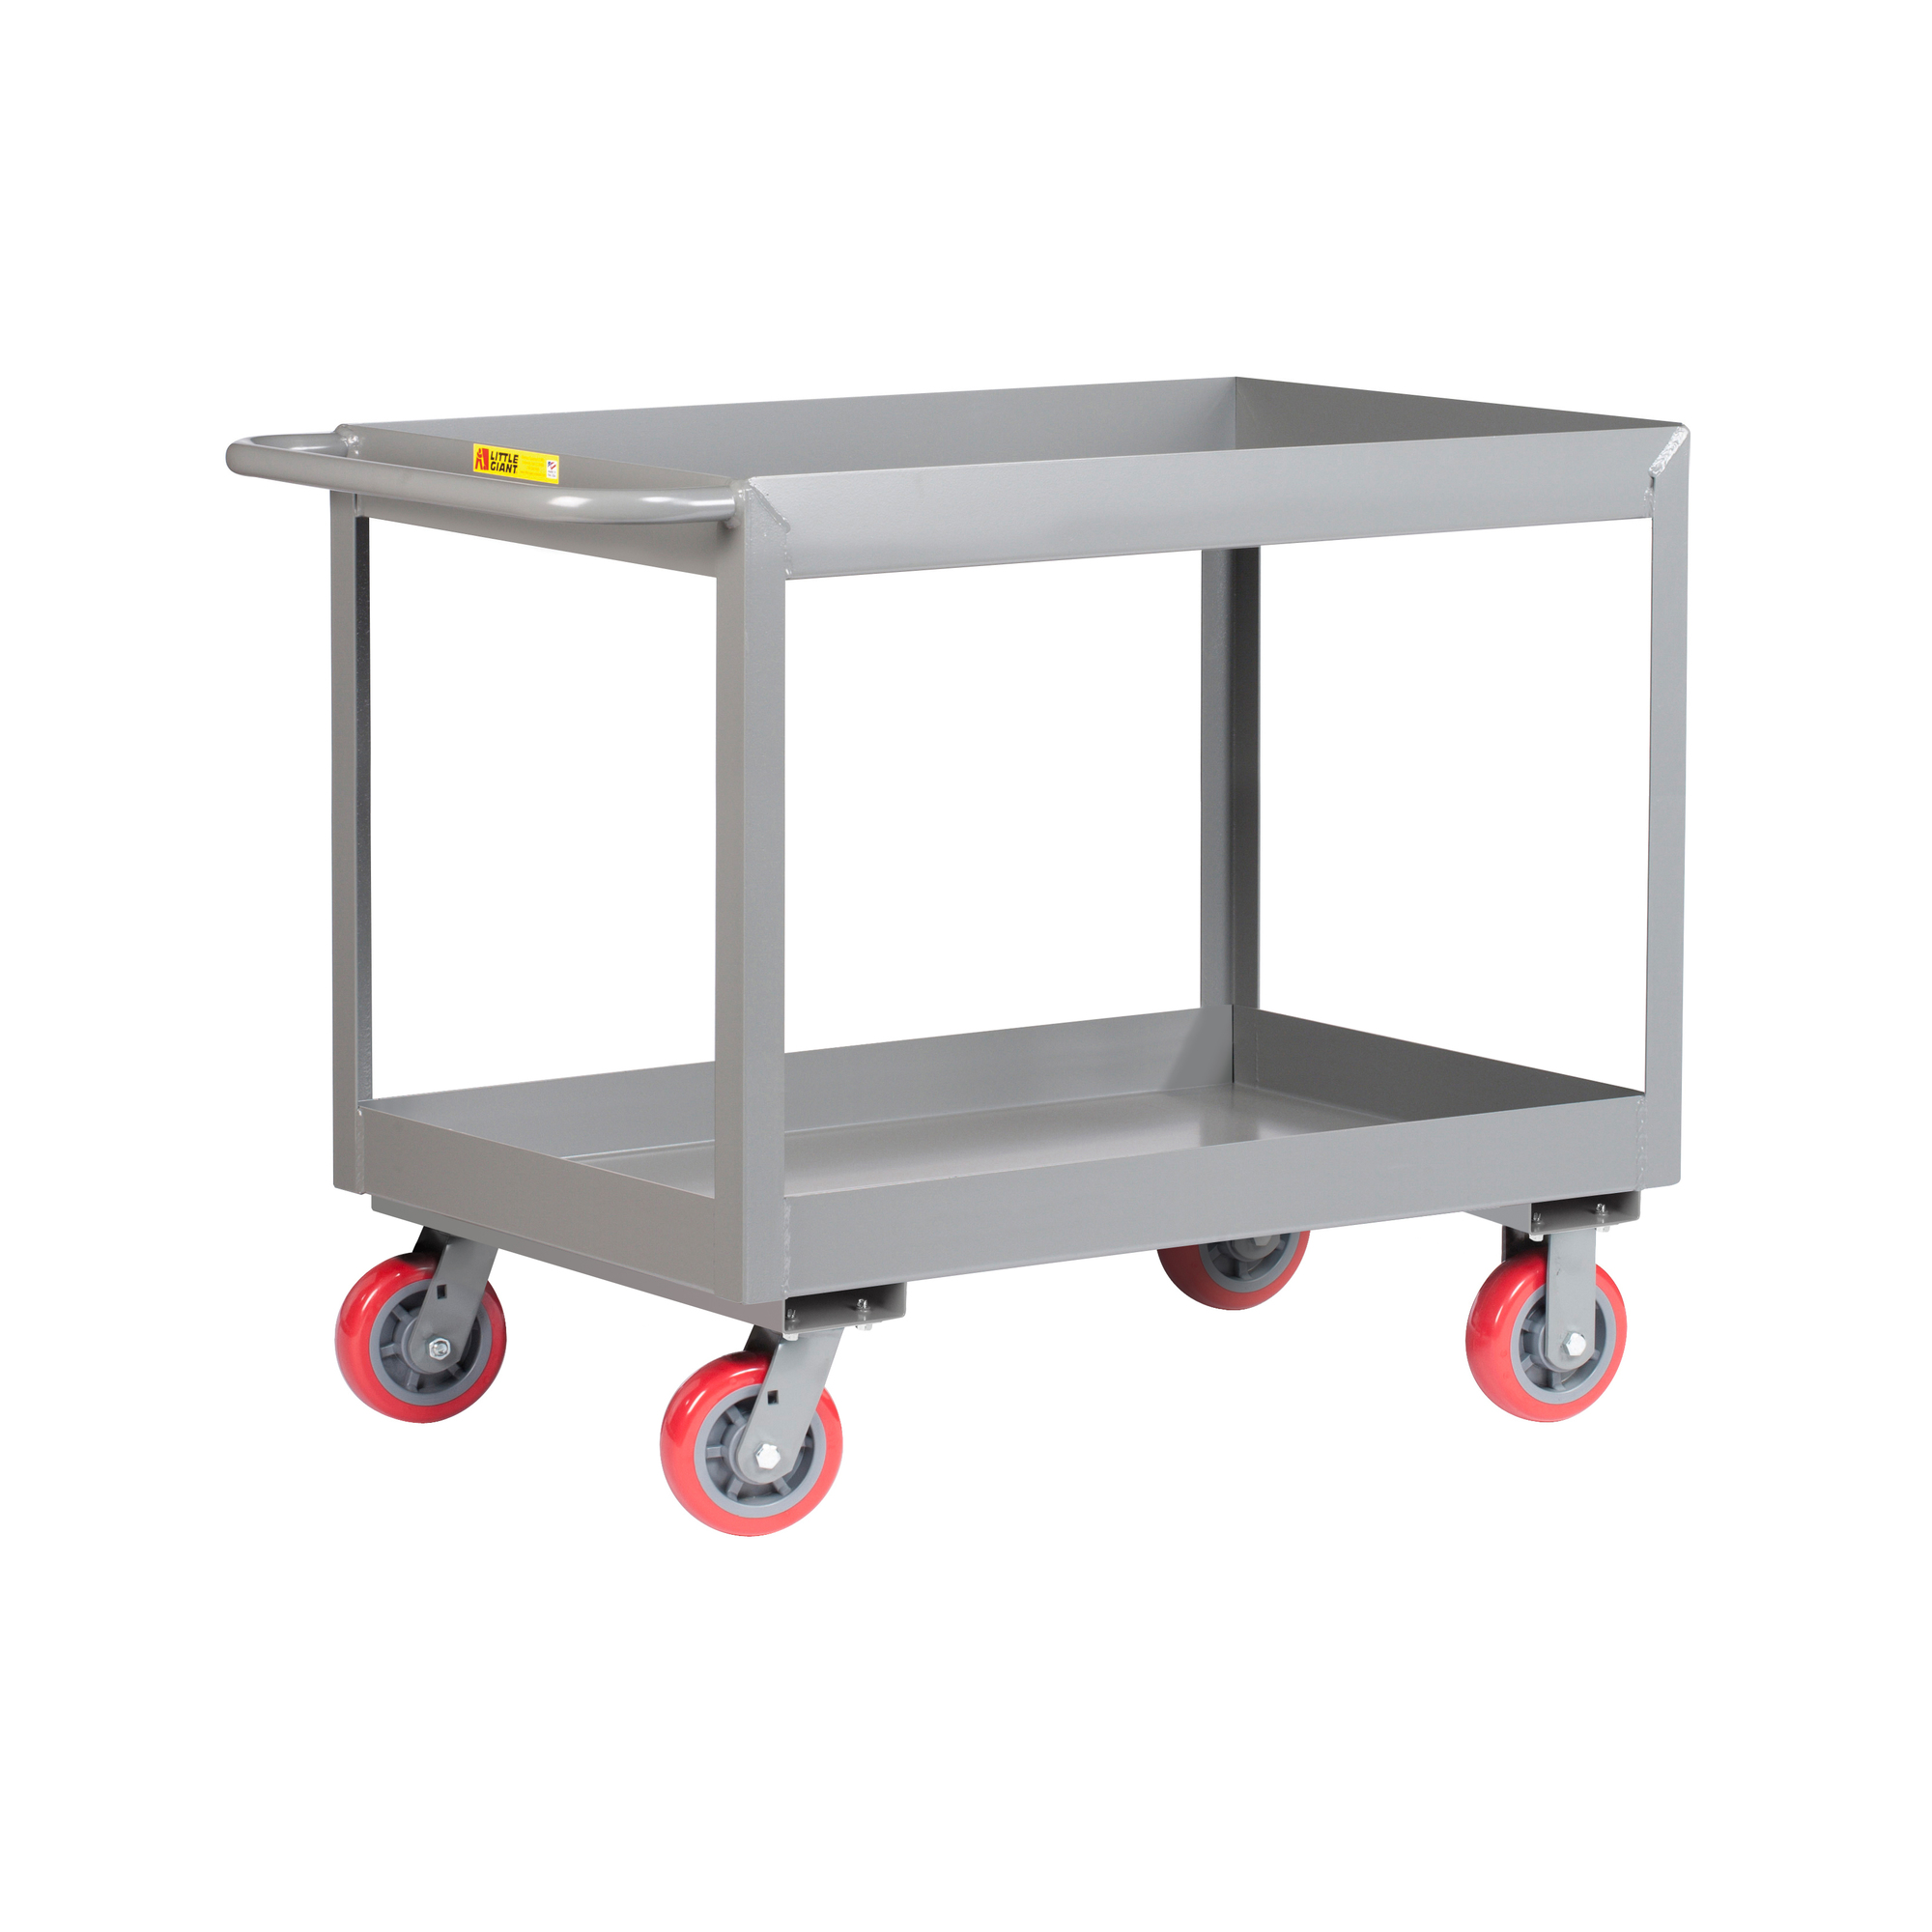 Little Giant, 3Inch Deep Shelf Truck, 24x36, 3600 lbs, Total Capacity 3600 lb, Shelves (qty.) 2, Material Carbon Steel, Model DS2436X3-6PY